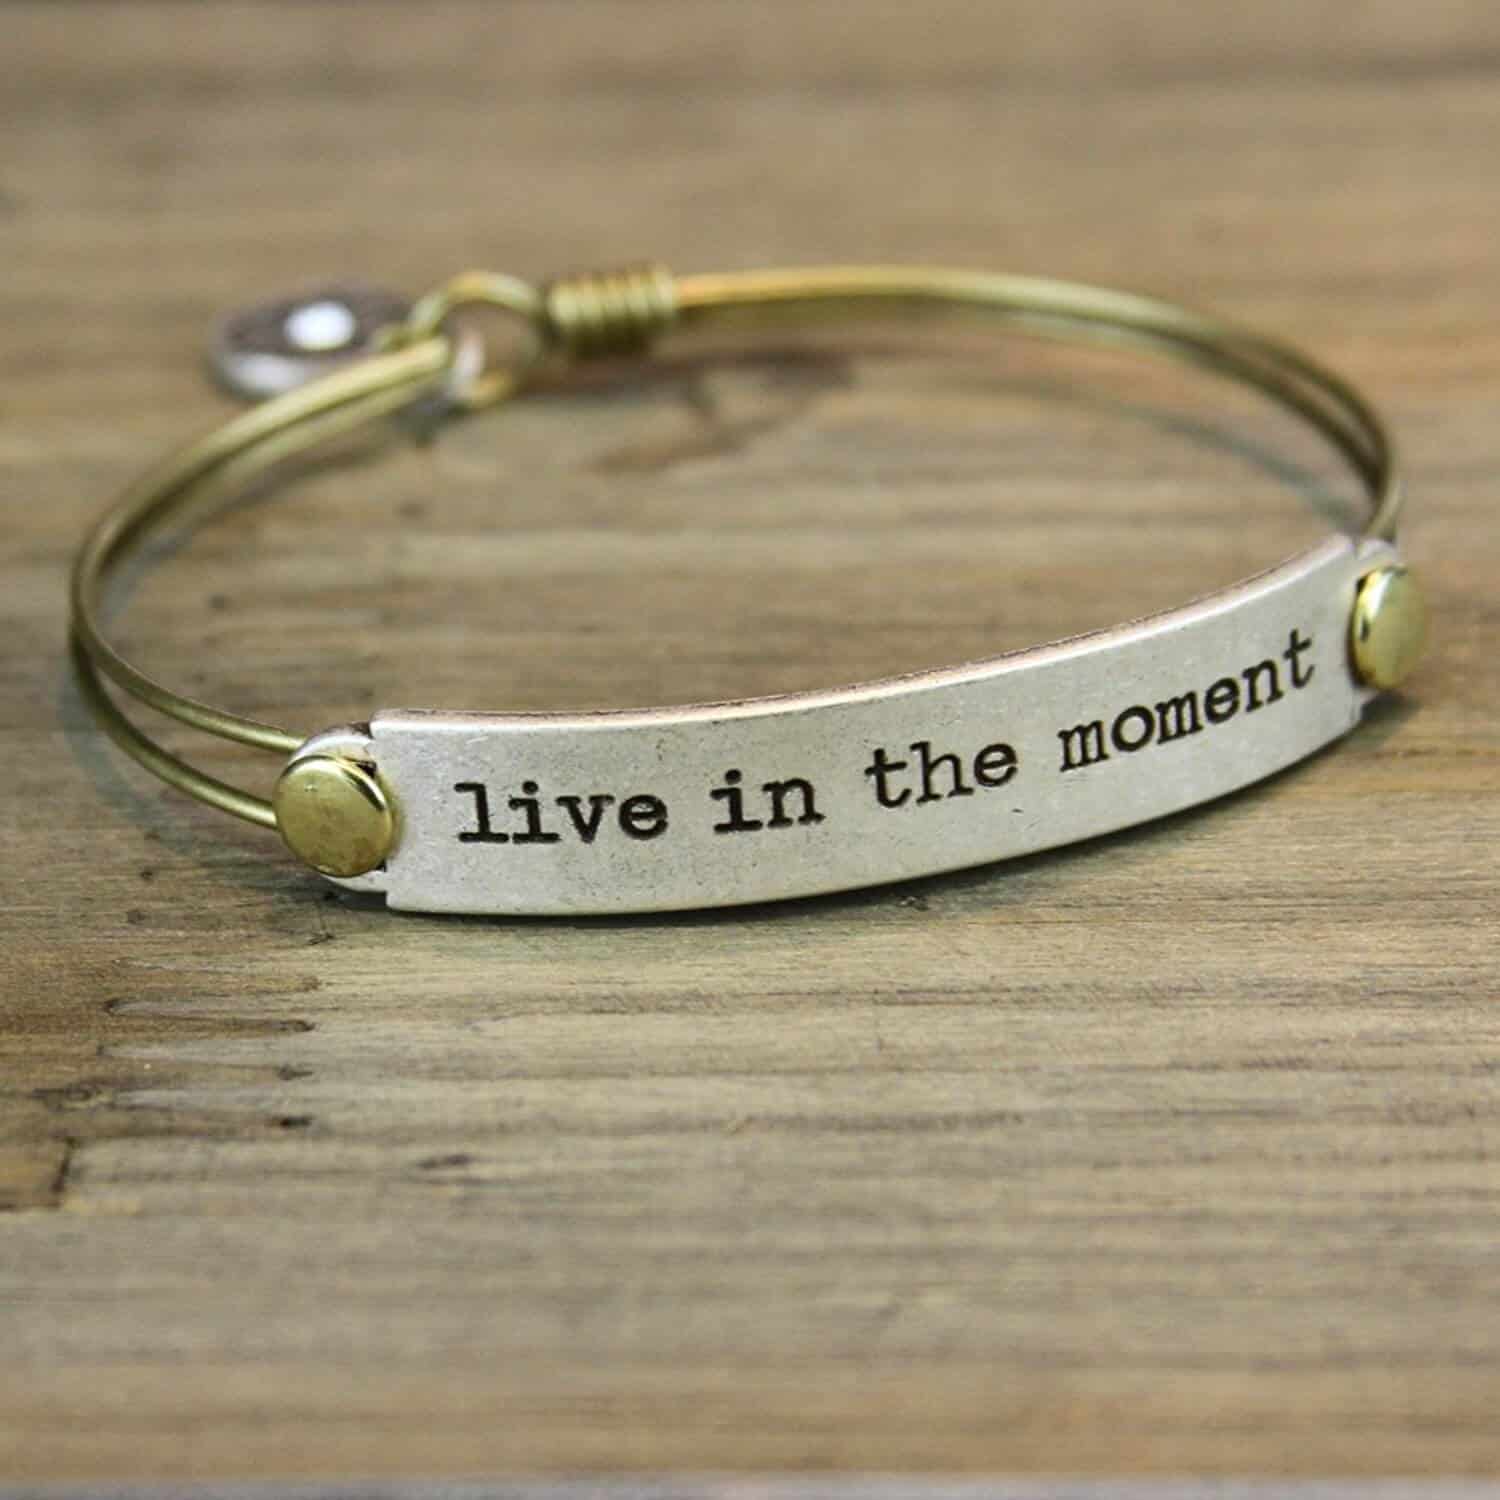 Live in the moment bracelet